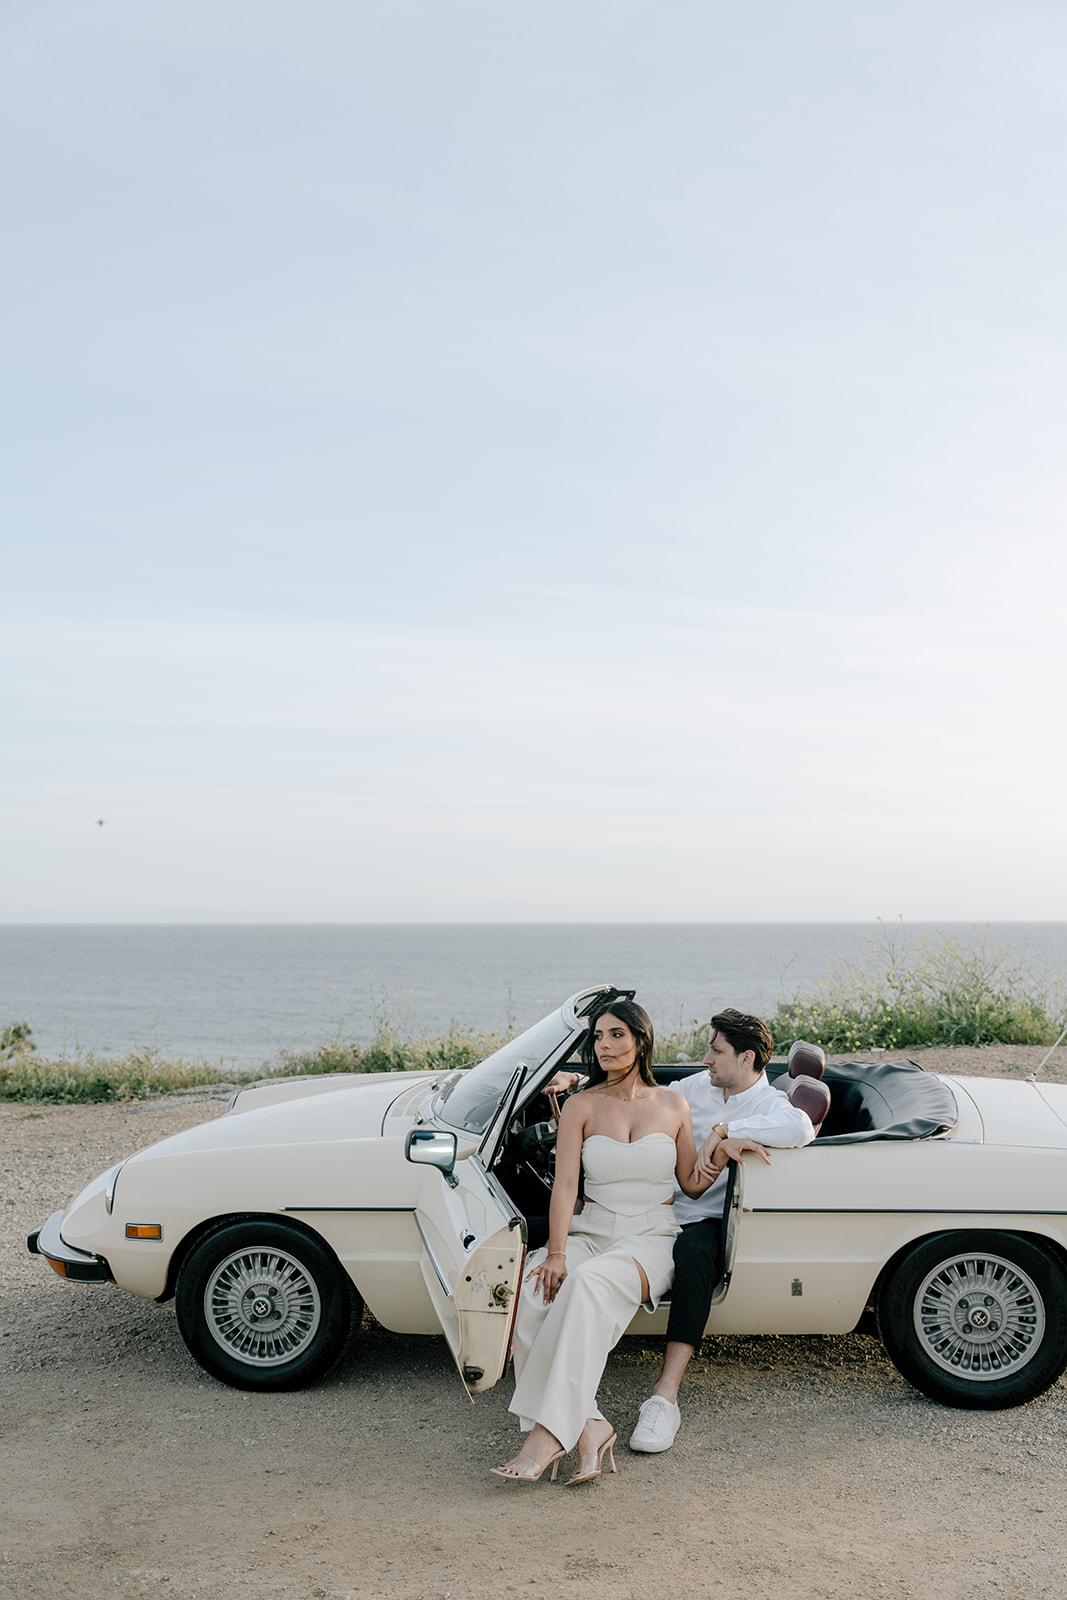 A couple poses inside a vintage car in Malibu.